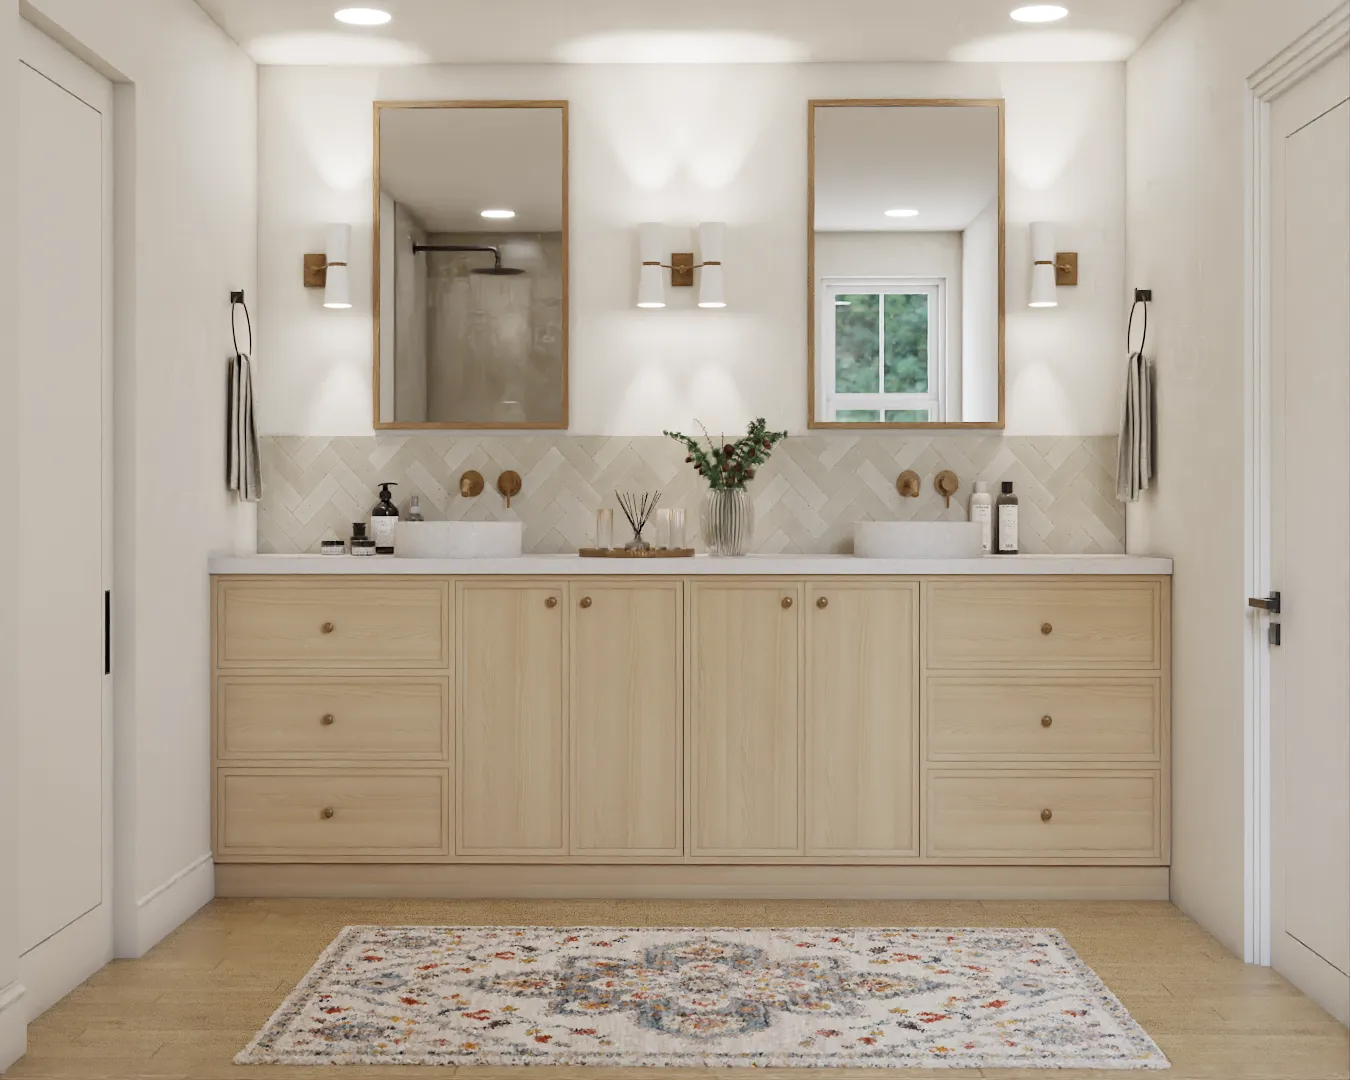 Minimalist bathroom design showcasing natural wood vanity and sleek fixtures, accented by understated lighting and clean lines. Design by Debora, an online interior design service.